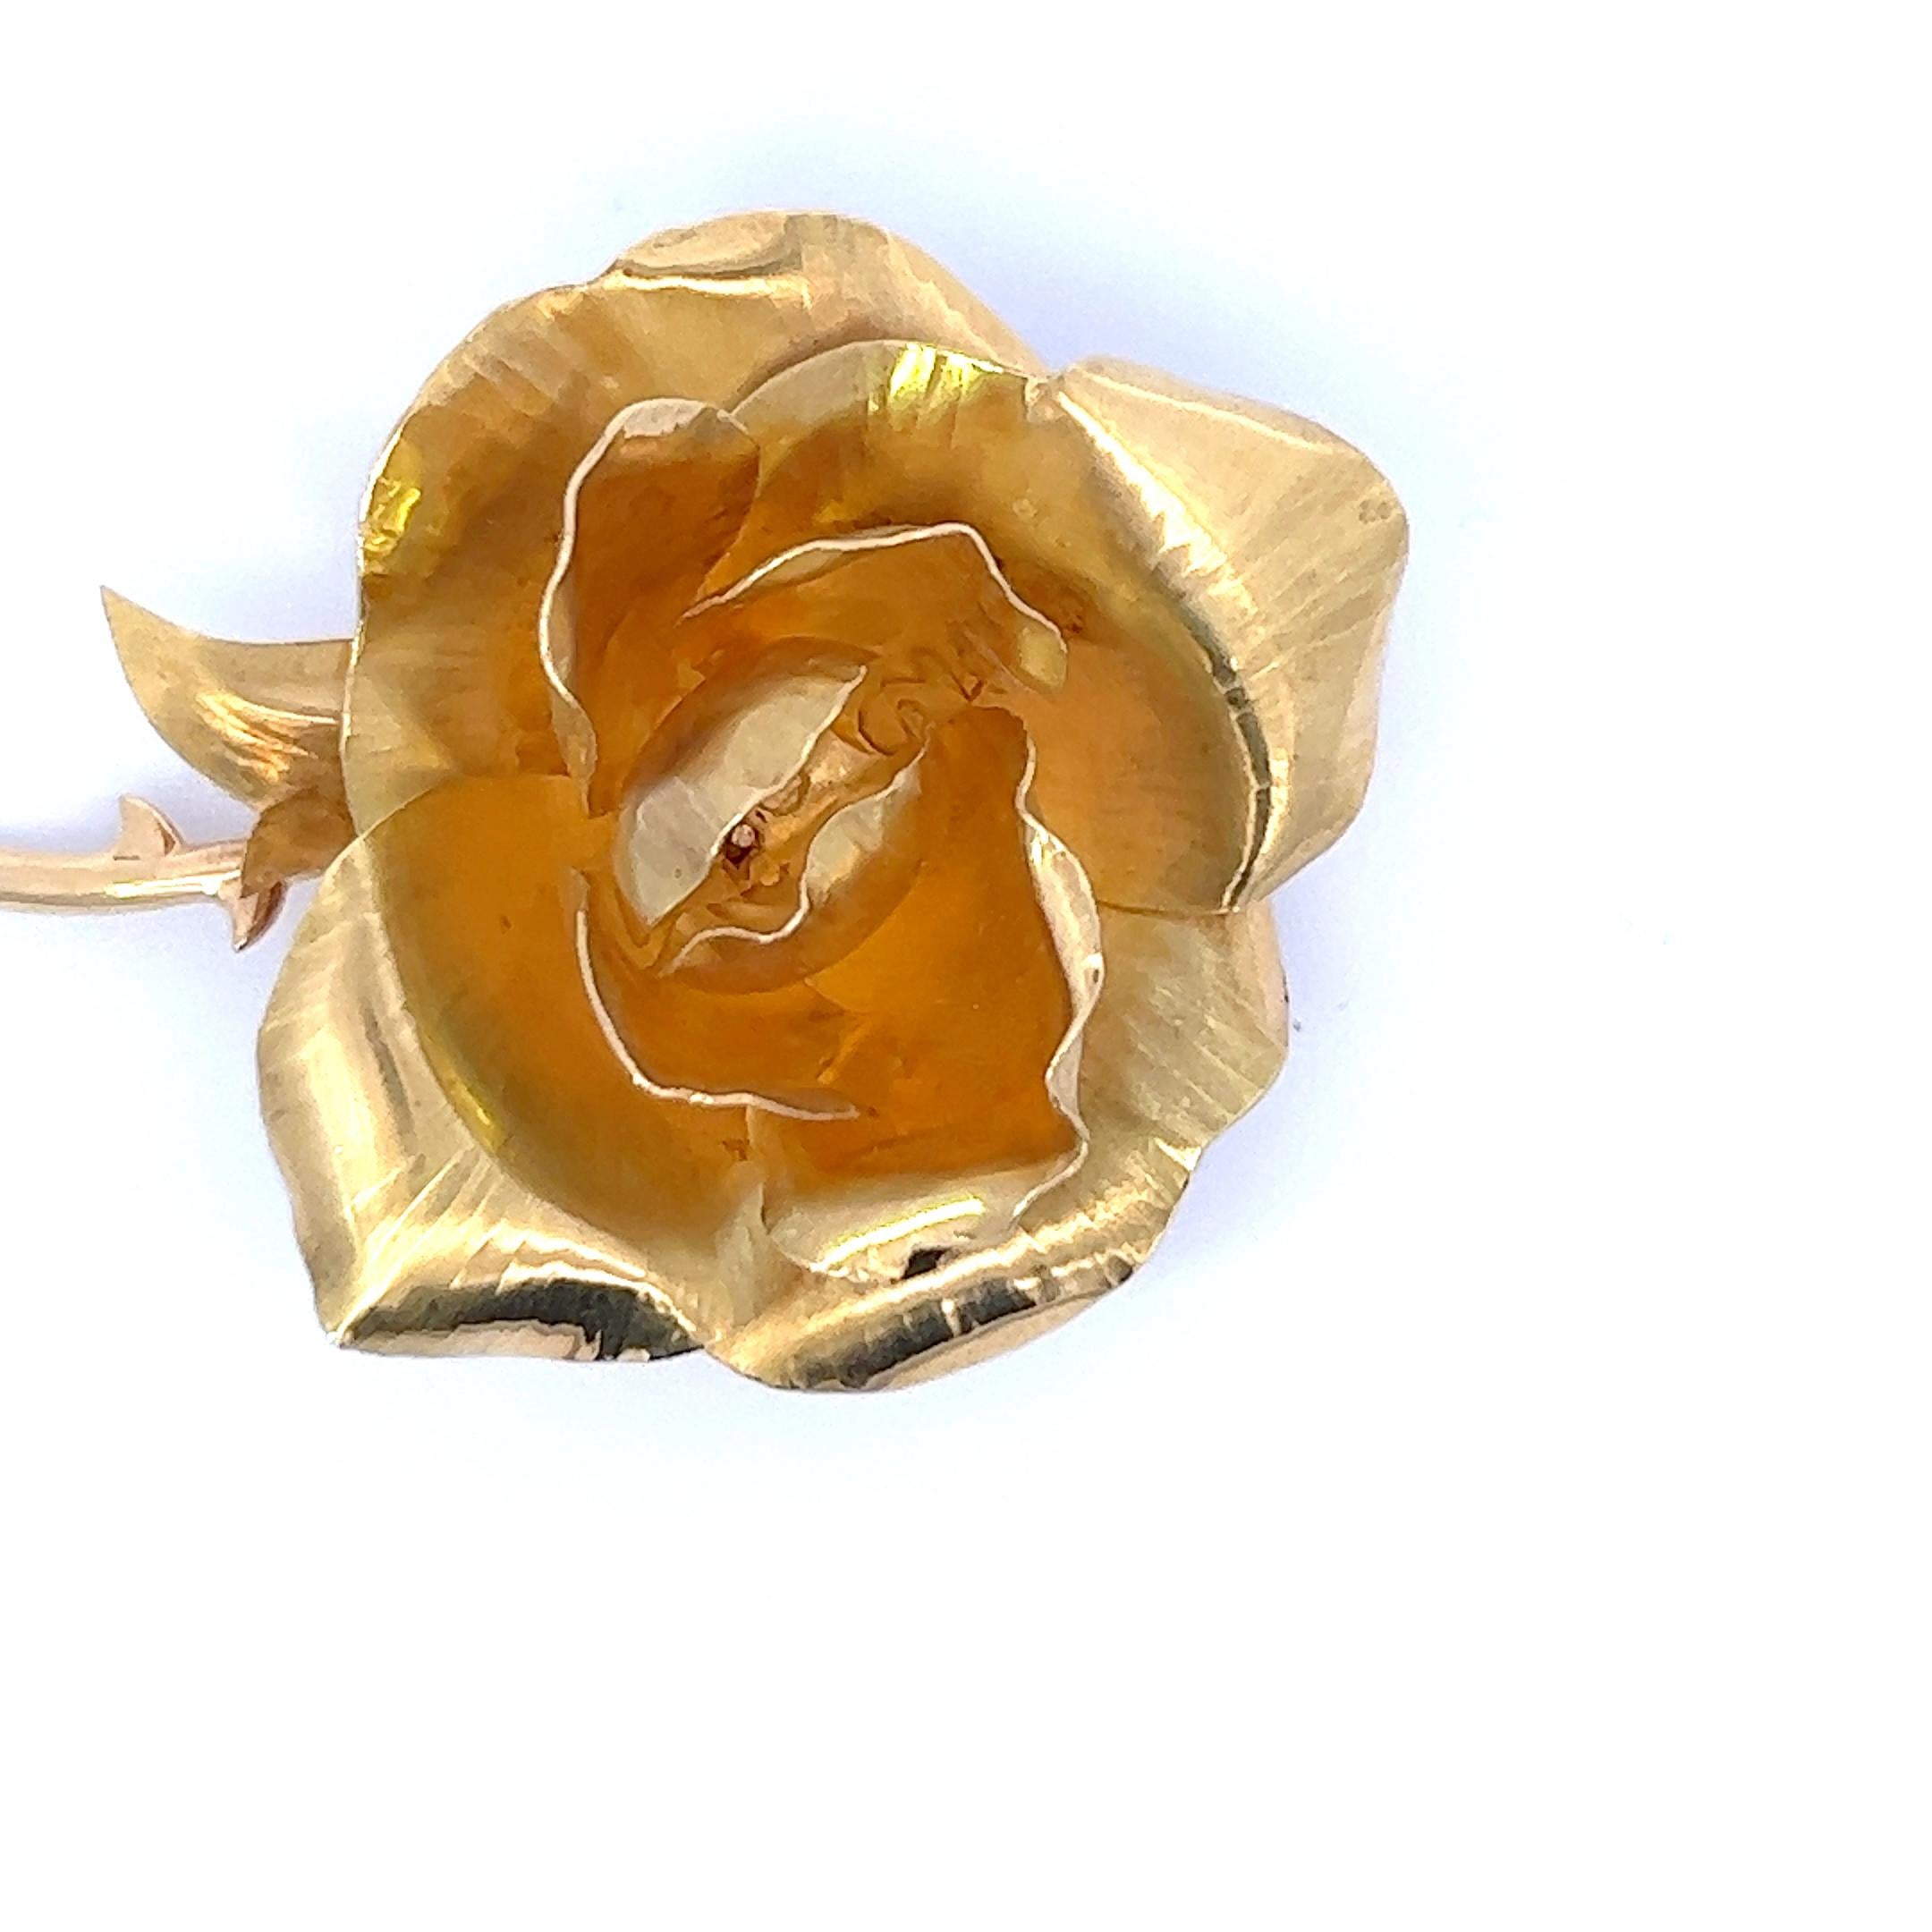 An 18k yellow gold brooch by Hermès, shaped as a 3 dimensional flower.
The brooch measures circa 5.9 by 4.5 cm. 
The brooch is marked with the French hallmark for 18k gold and a French makers mark. 
The brooch is signed Hermès.
The brooch was made